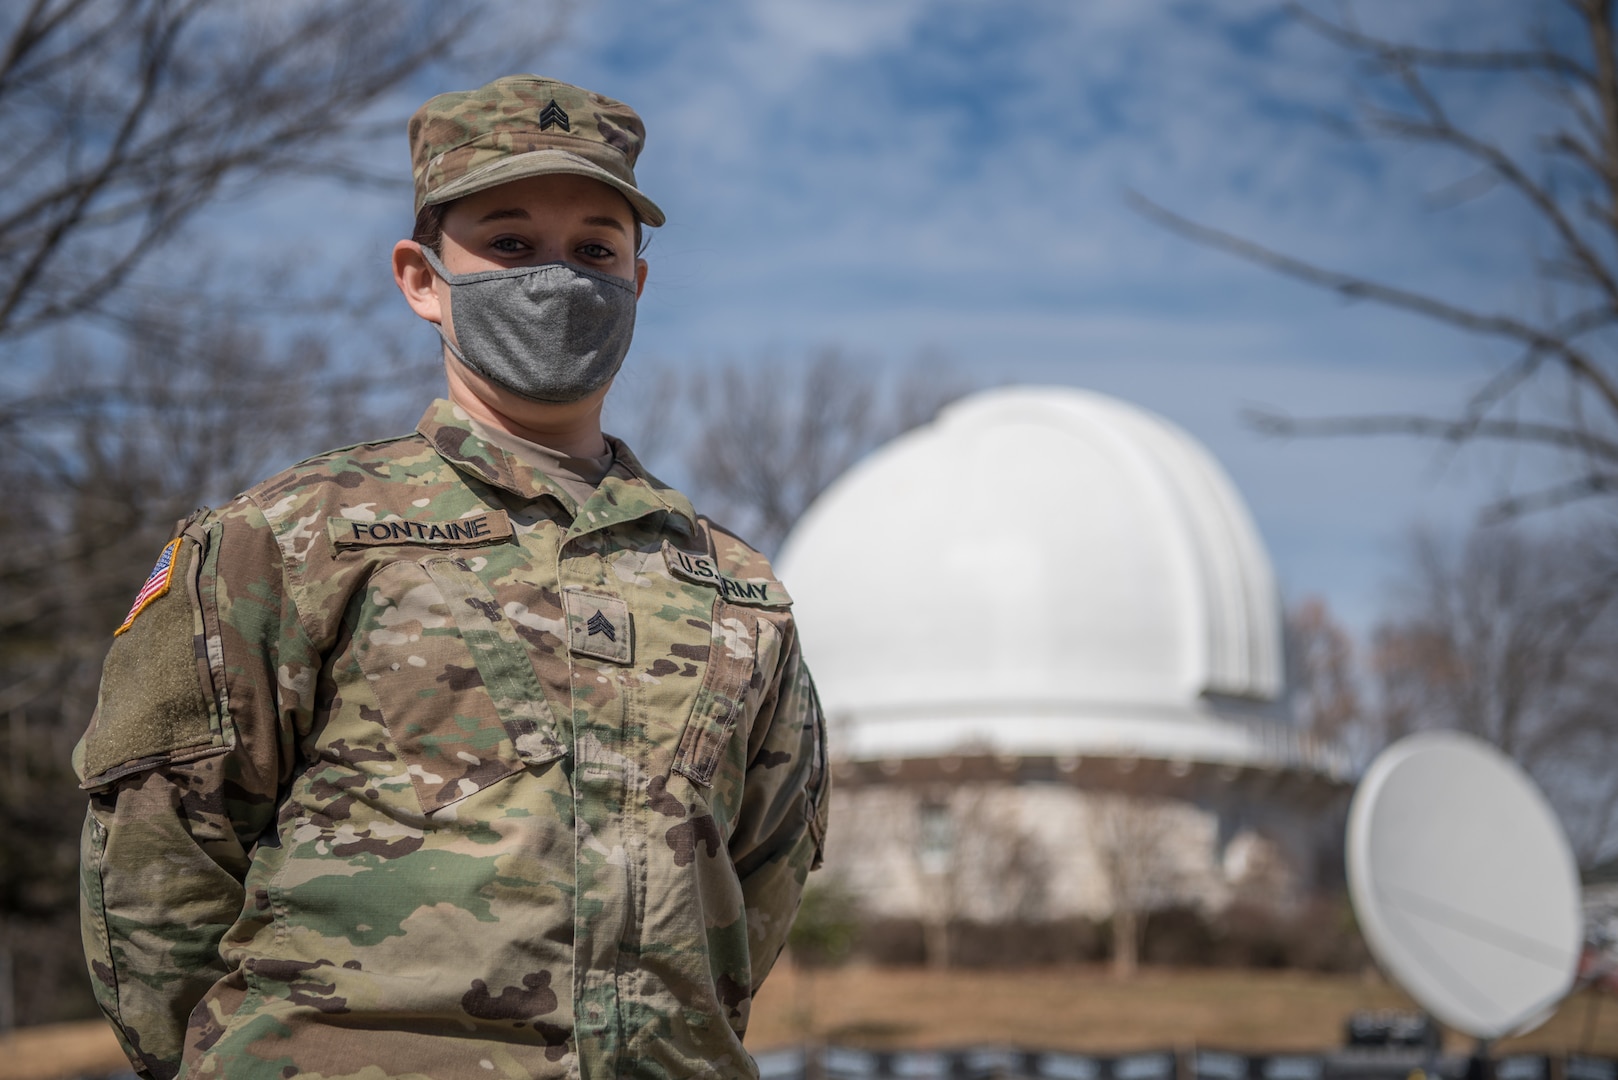 Sgt. Christina Fontaine, with the Vermont National Guard’s medical detachment, poses for a photo at the United States Naval Observatory in Washington, D.C., Feb. 17, 2021. The National Guard has been requested to continue supporting federal law enforcement agencies with security, communications, medical evacuation, logistics and safety support to state, district and federal agencies through mid-March. (U.S. Air National Guard photo by Staff Sgt. Joshua Horton)